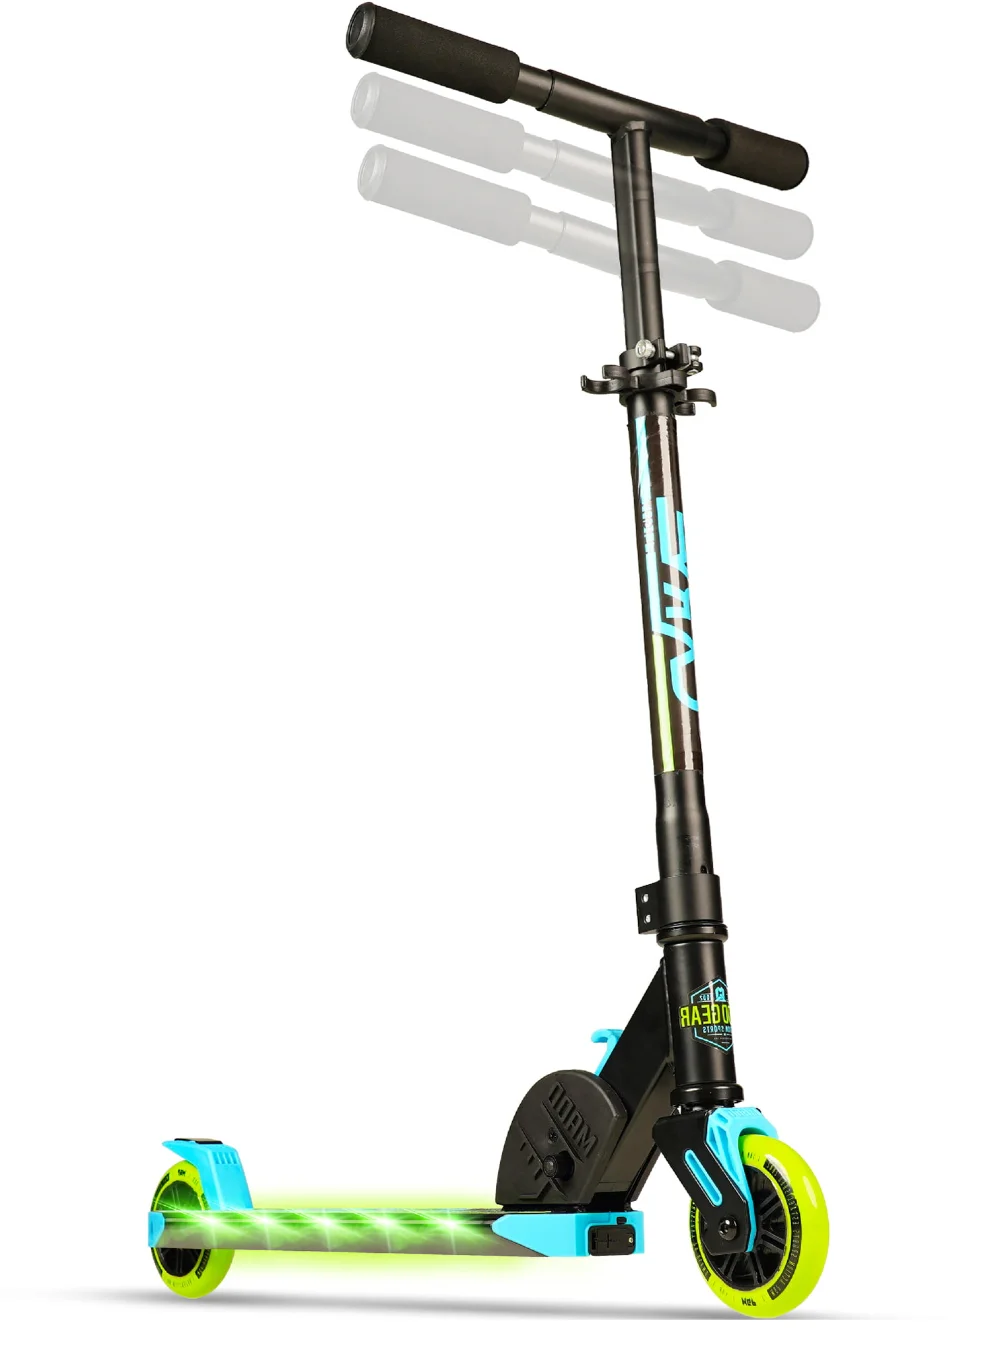 Flight Light-up Kids Kick Folding Scooter Height Adjustable Unisex 3 Yrs + Kick Scooter Adult Scooter Electric Scooter